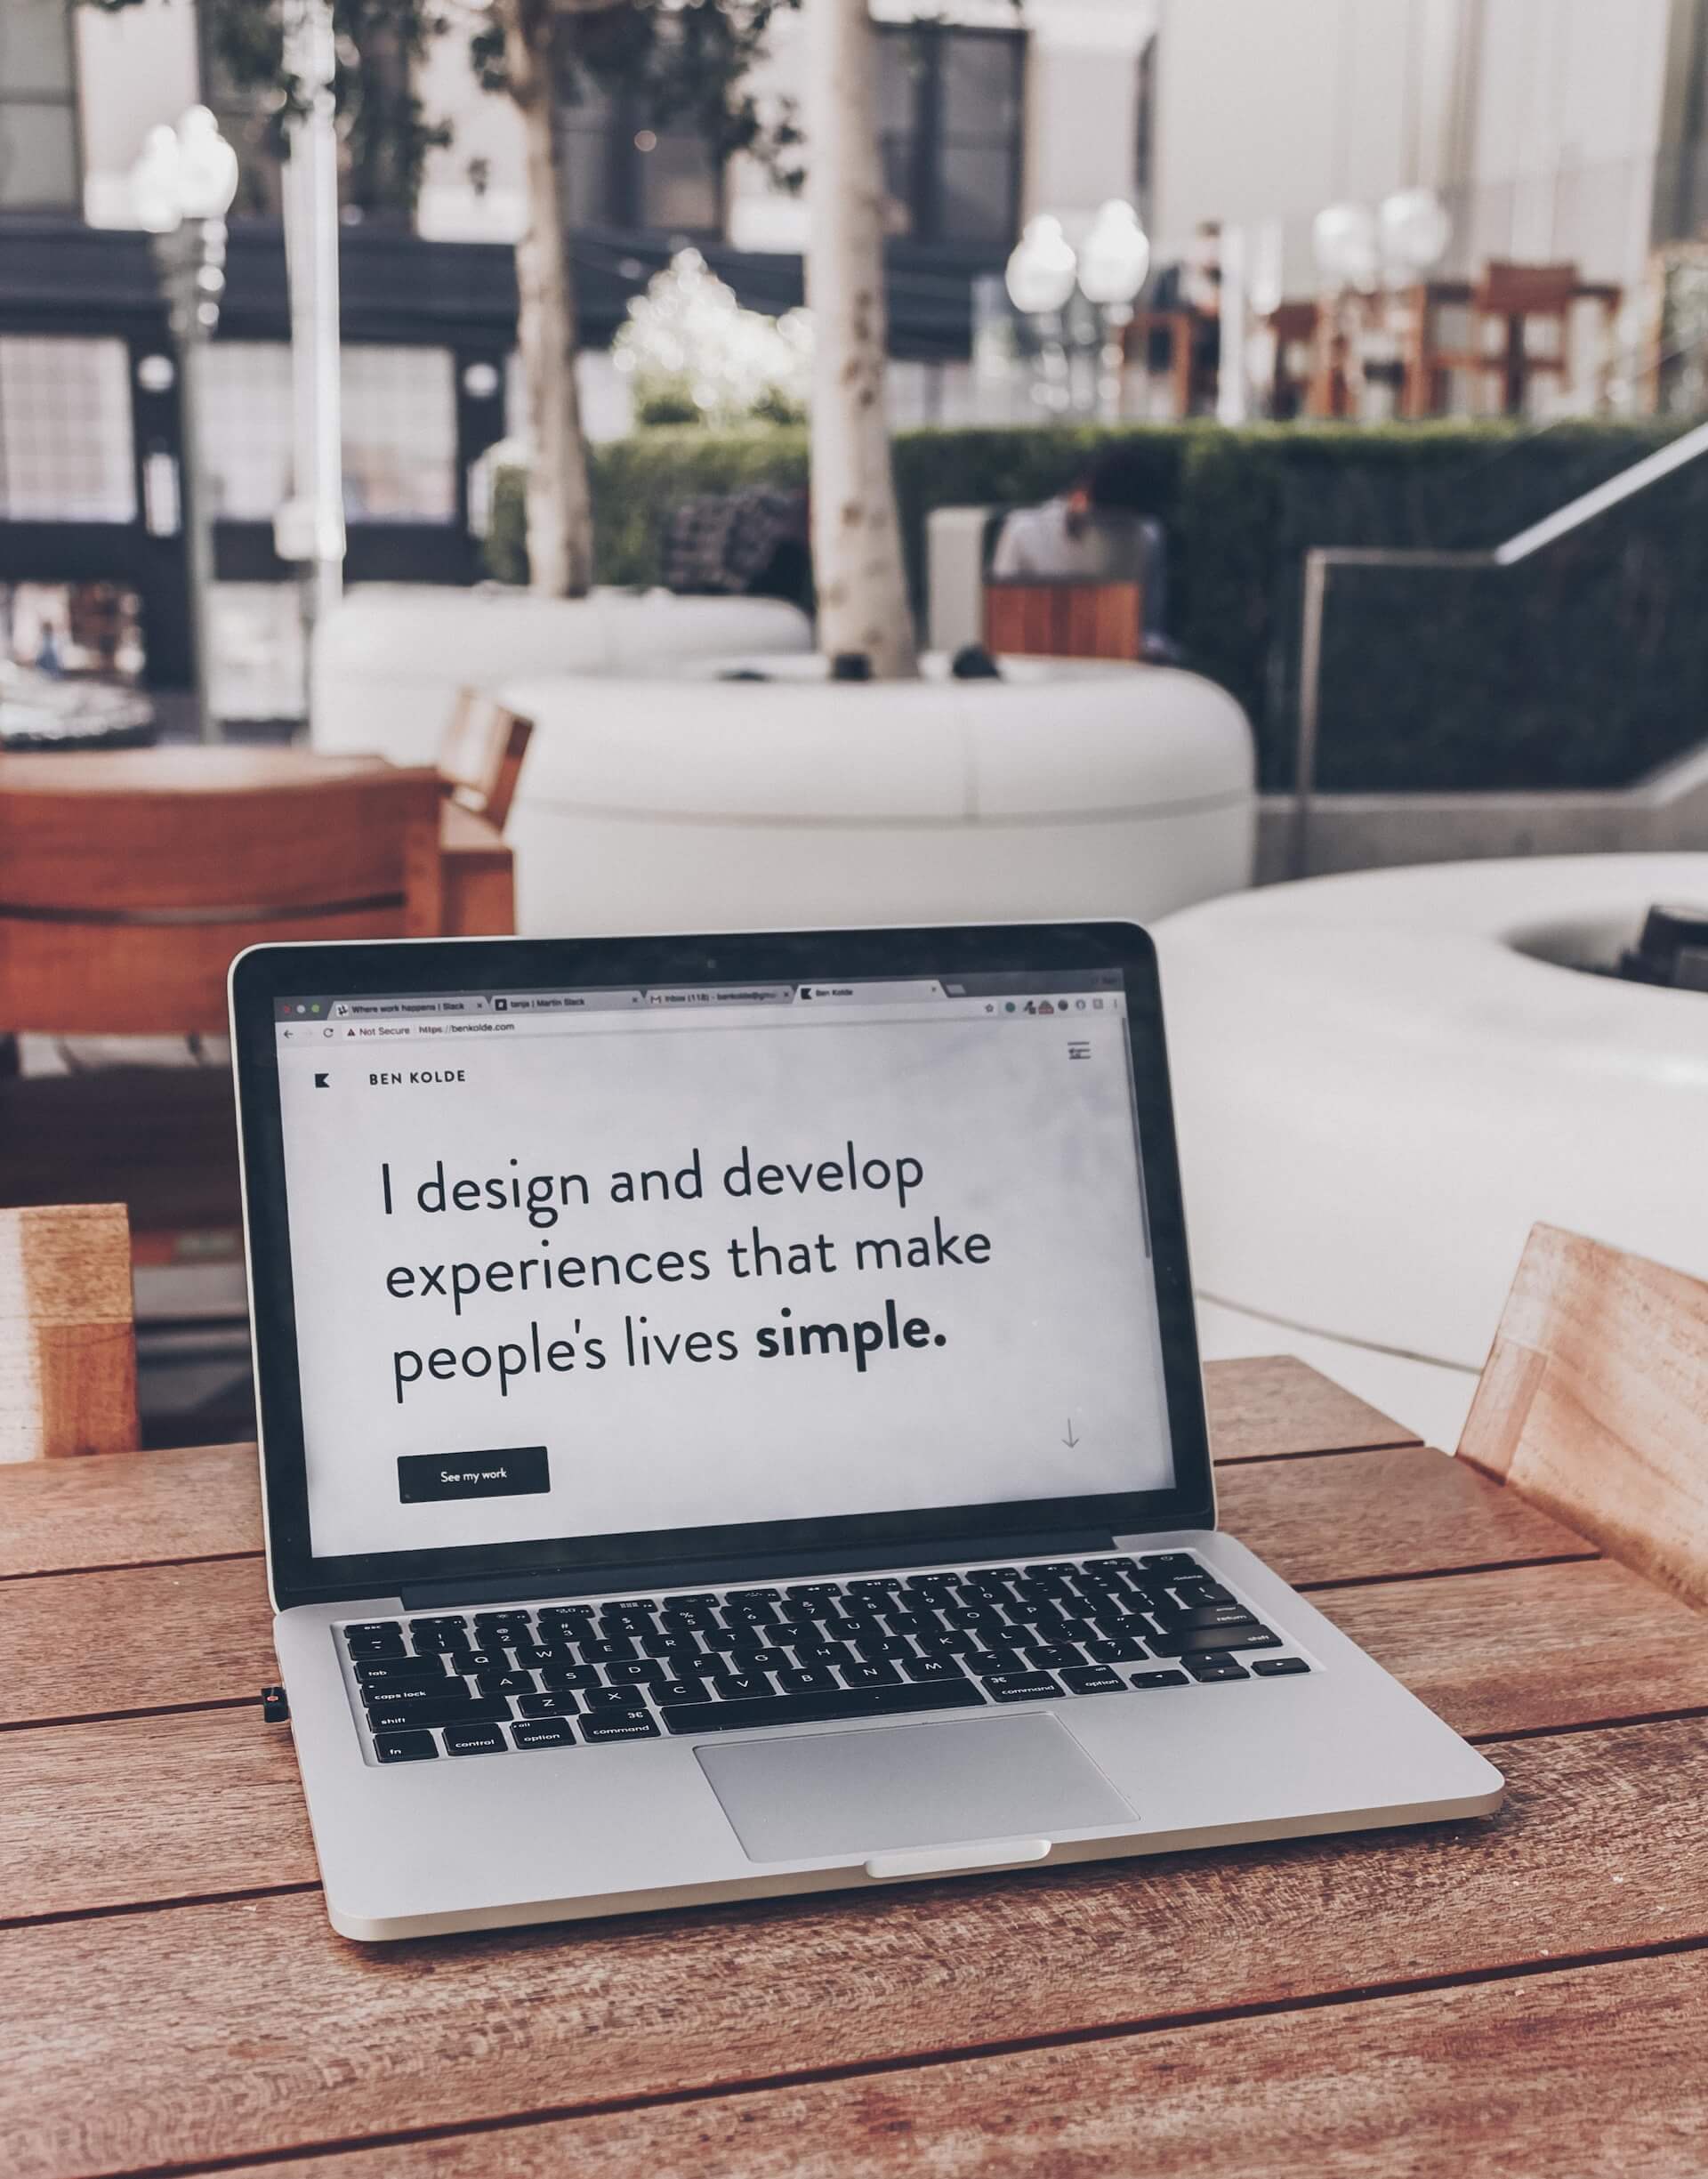 Laptop mit Text "I design and develop experiences that make people's lives simple."